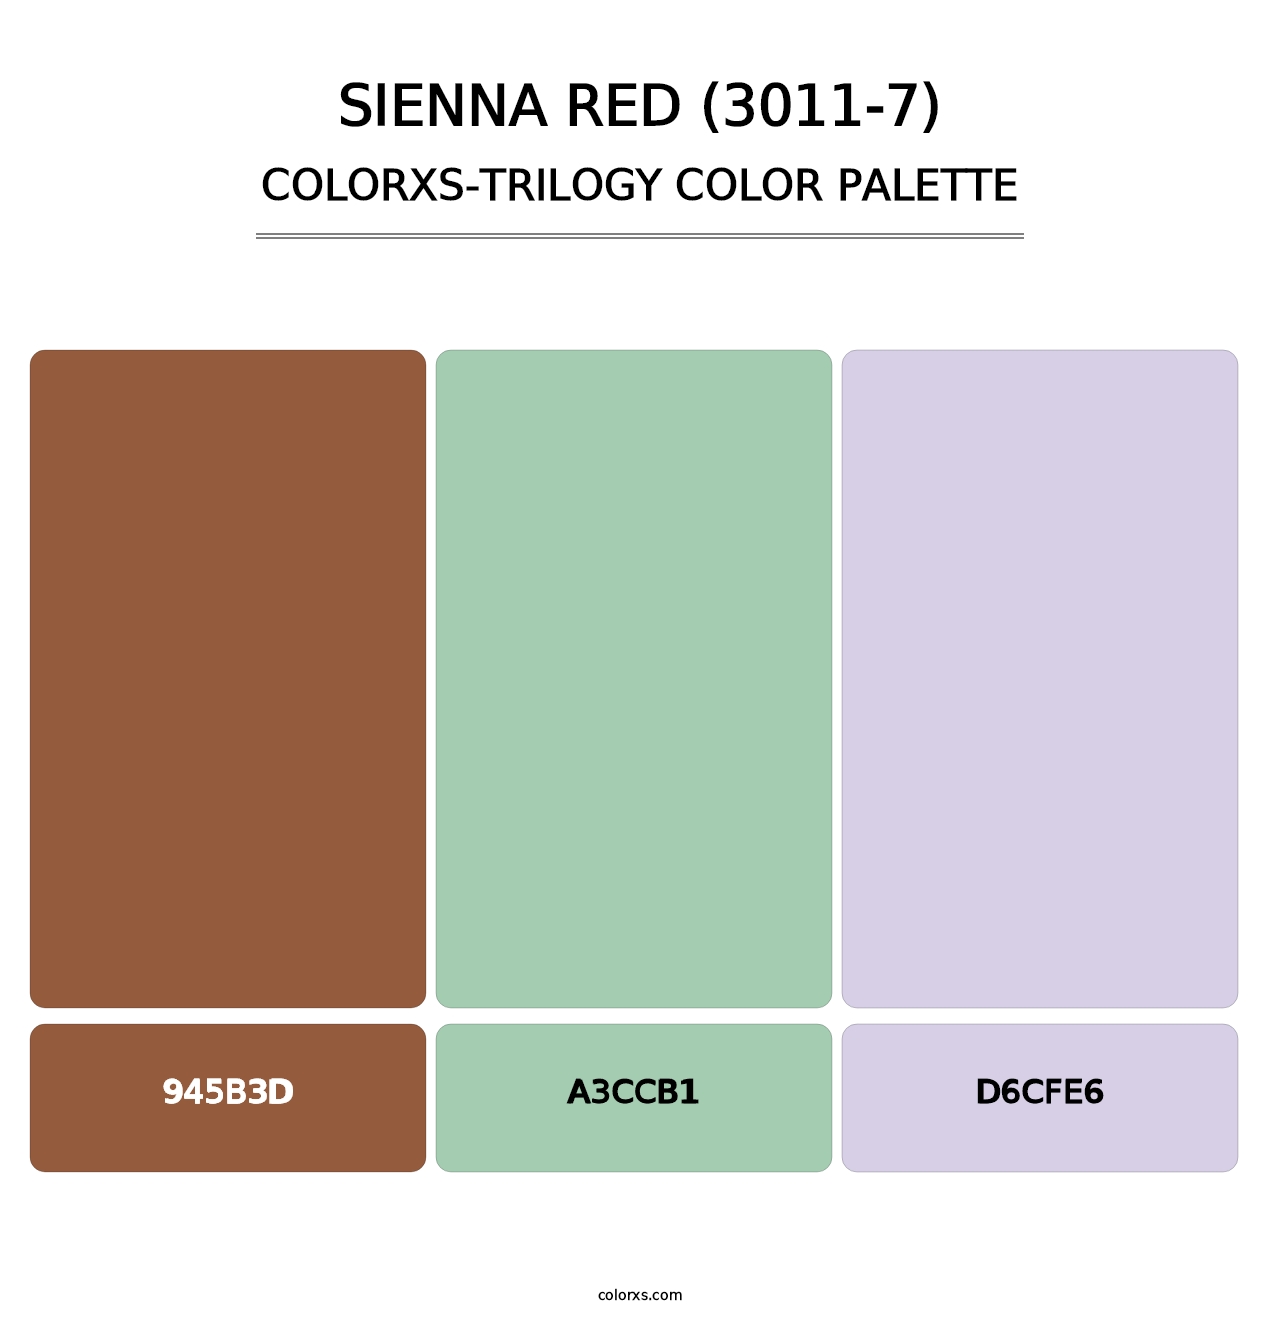 Sienna Red (3011-7) - Colorxs Trilogy Palette